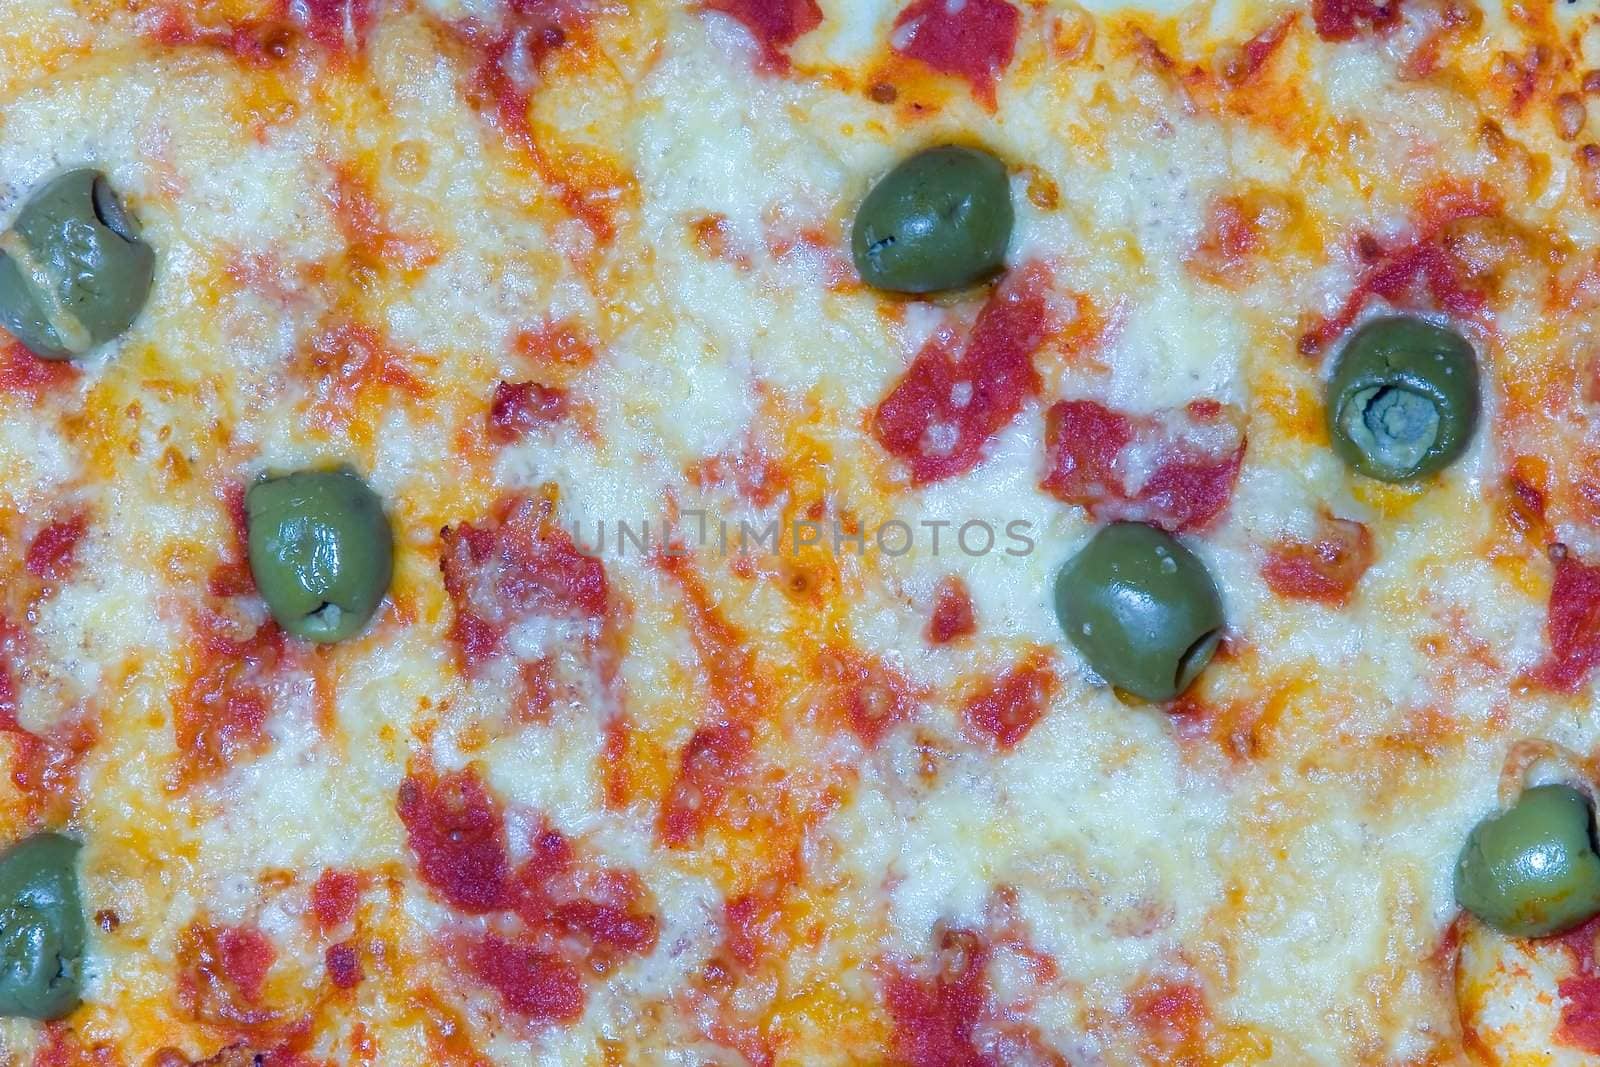 The fresh with olives pizza photographed close up